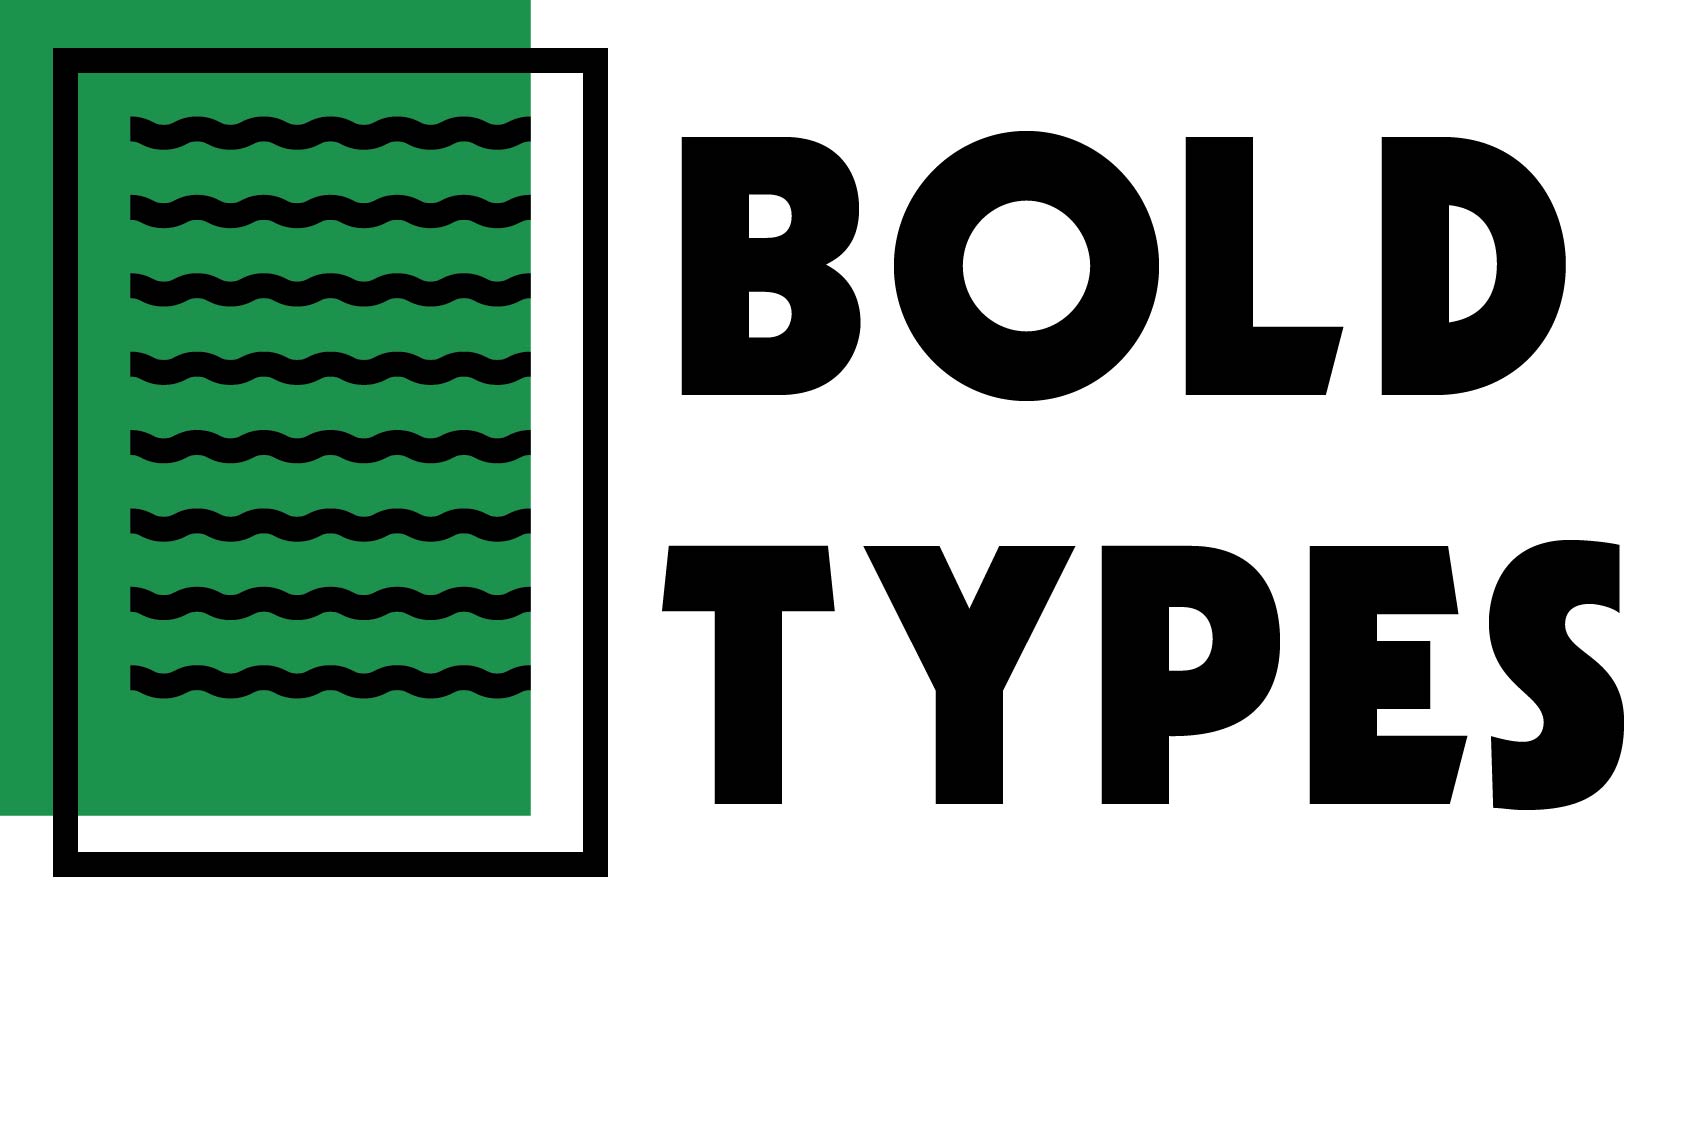 Bold Types Logo that shows a piece of paper with squiggles on it to represent text. The paper has another green rectangle behind it and next to this it says 'Bold Types'